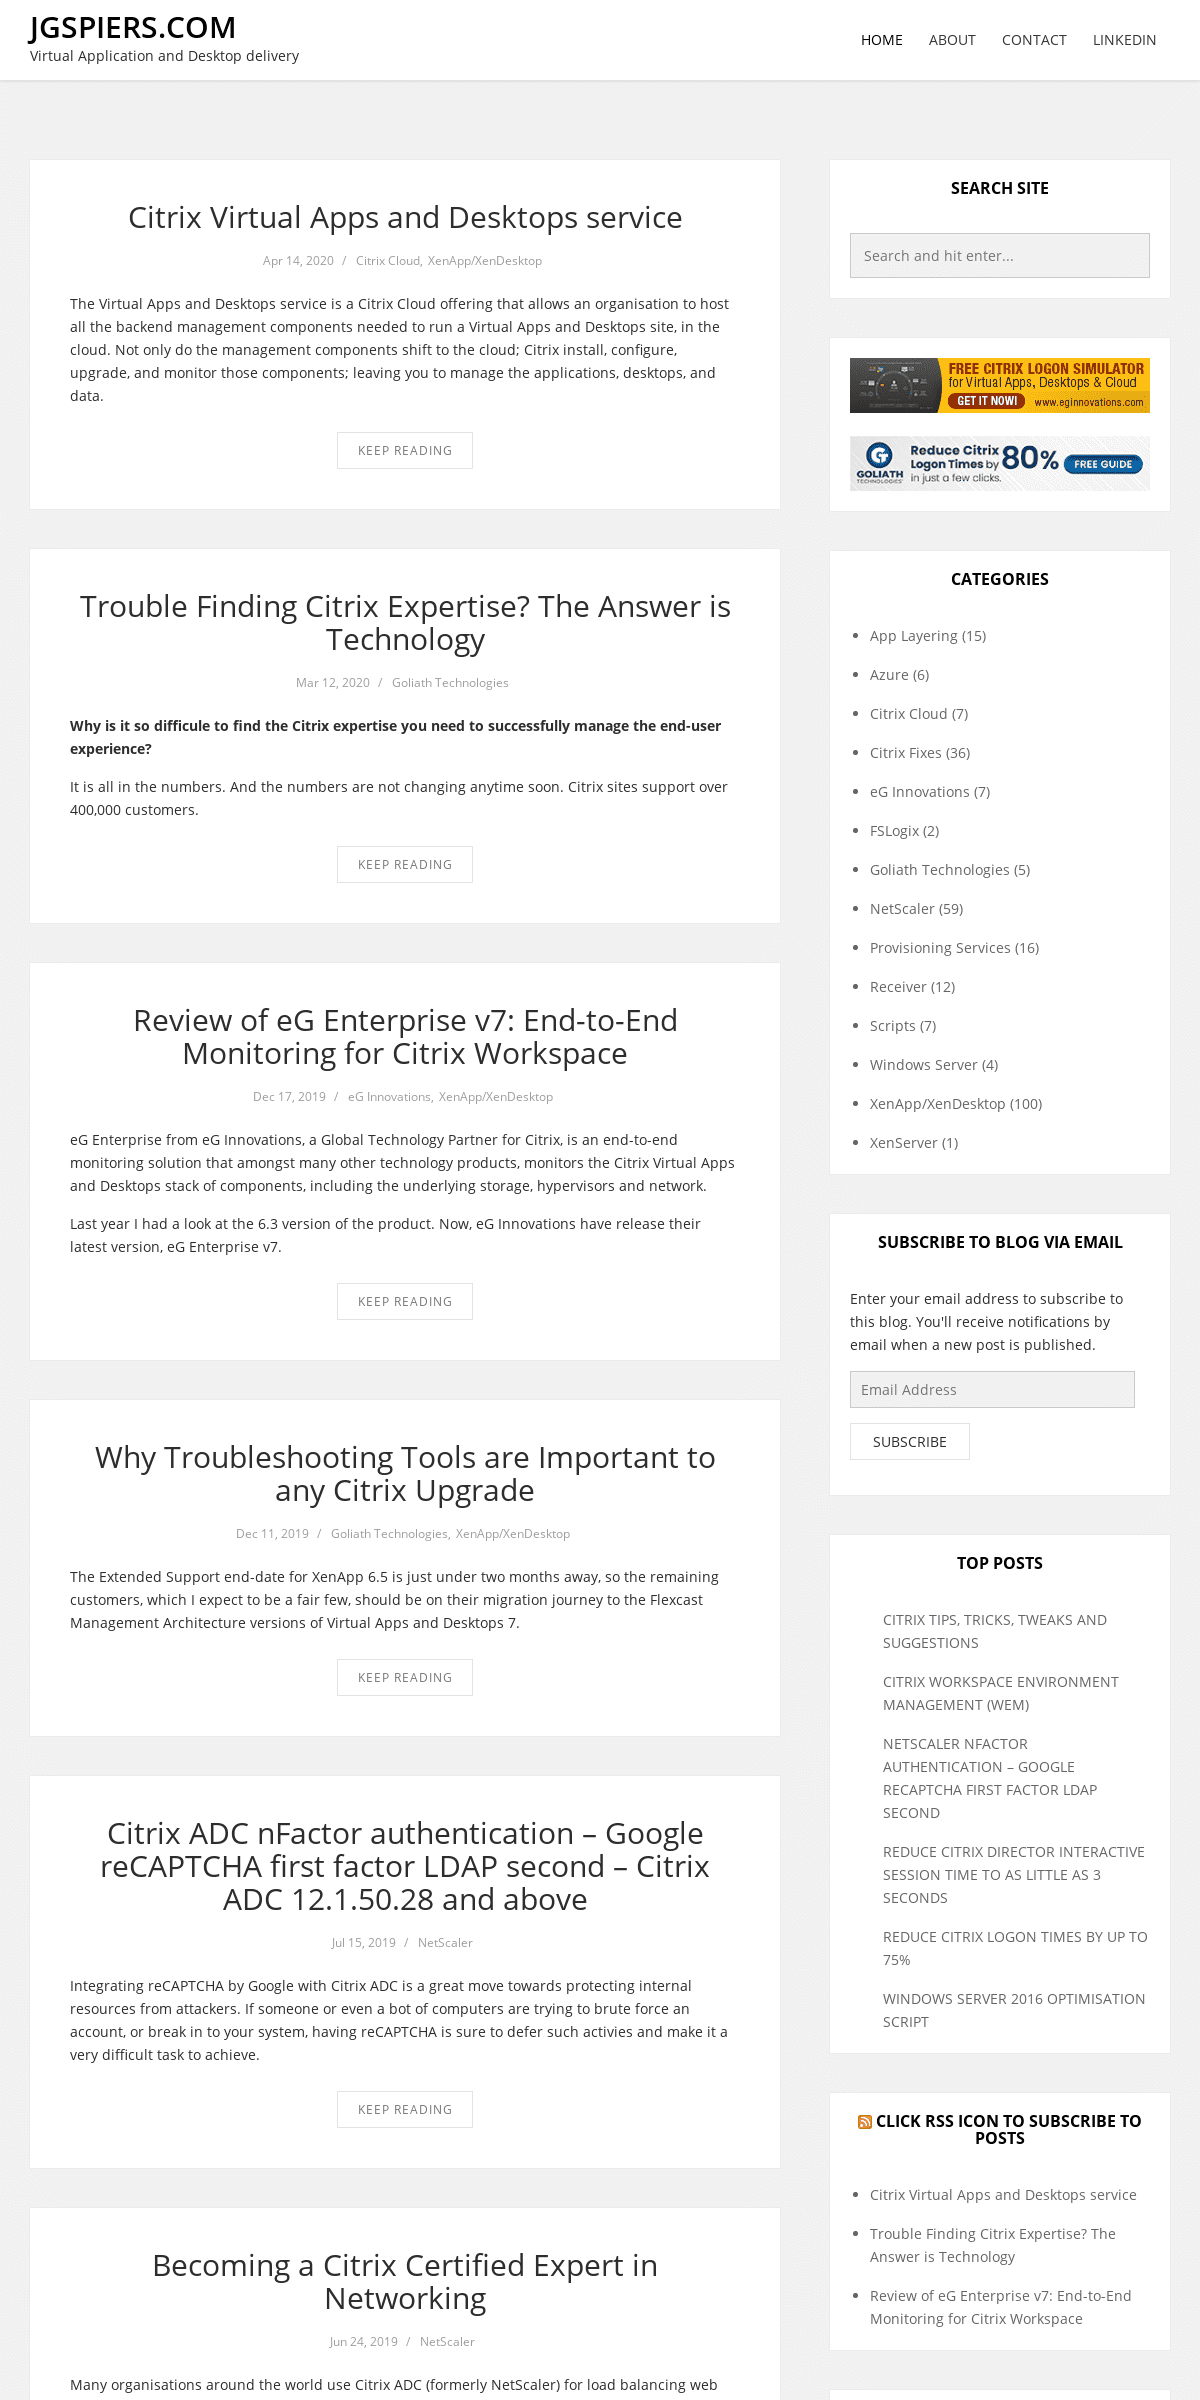 A complete backup of jgspiers.com